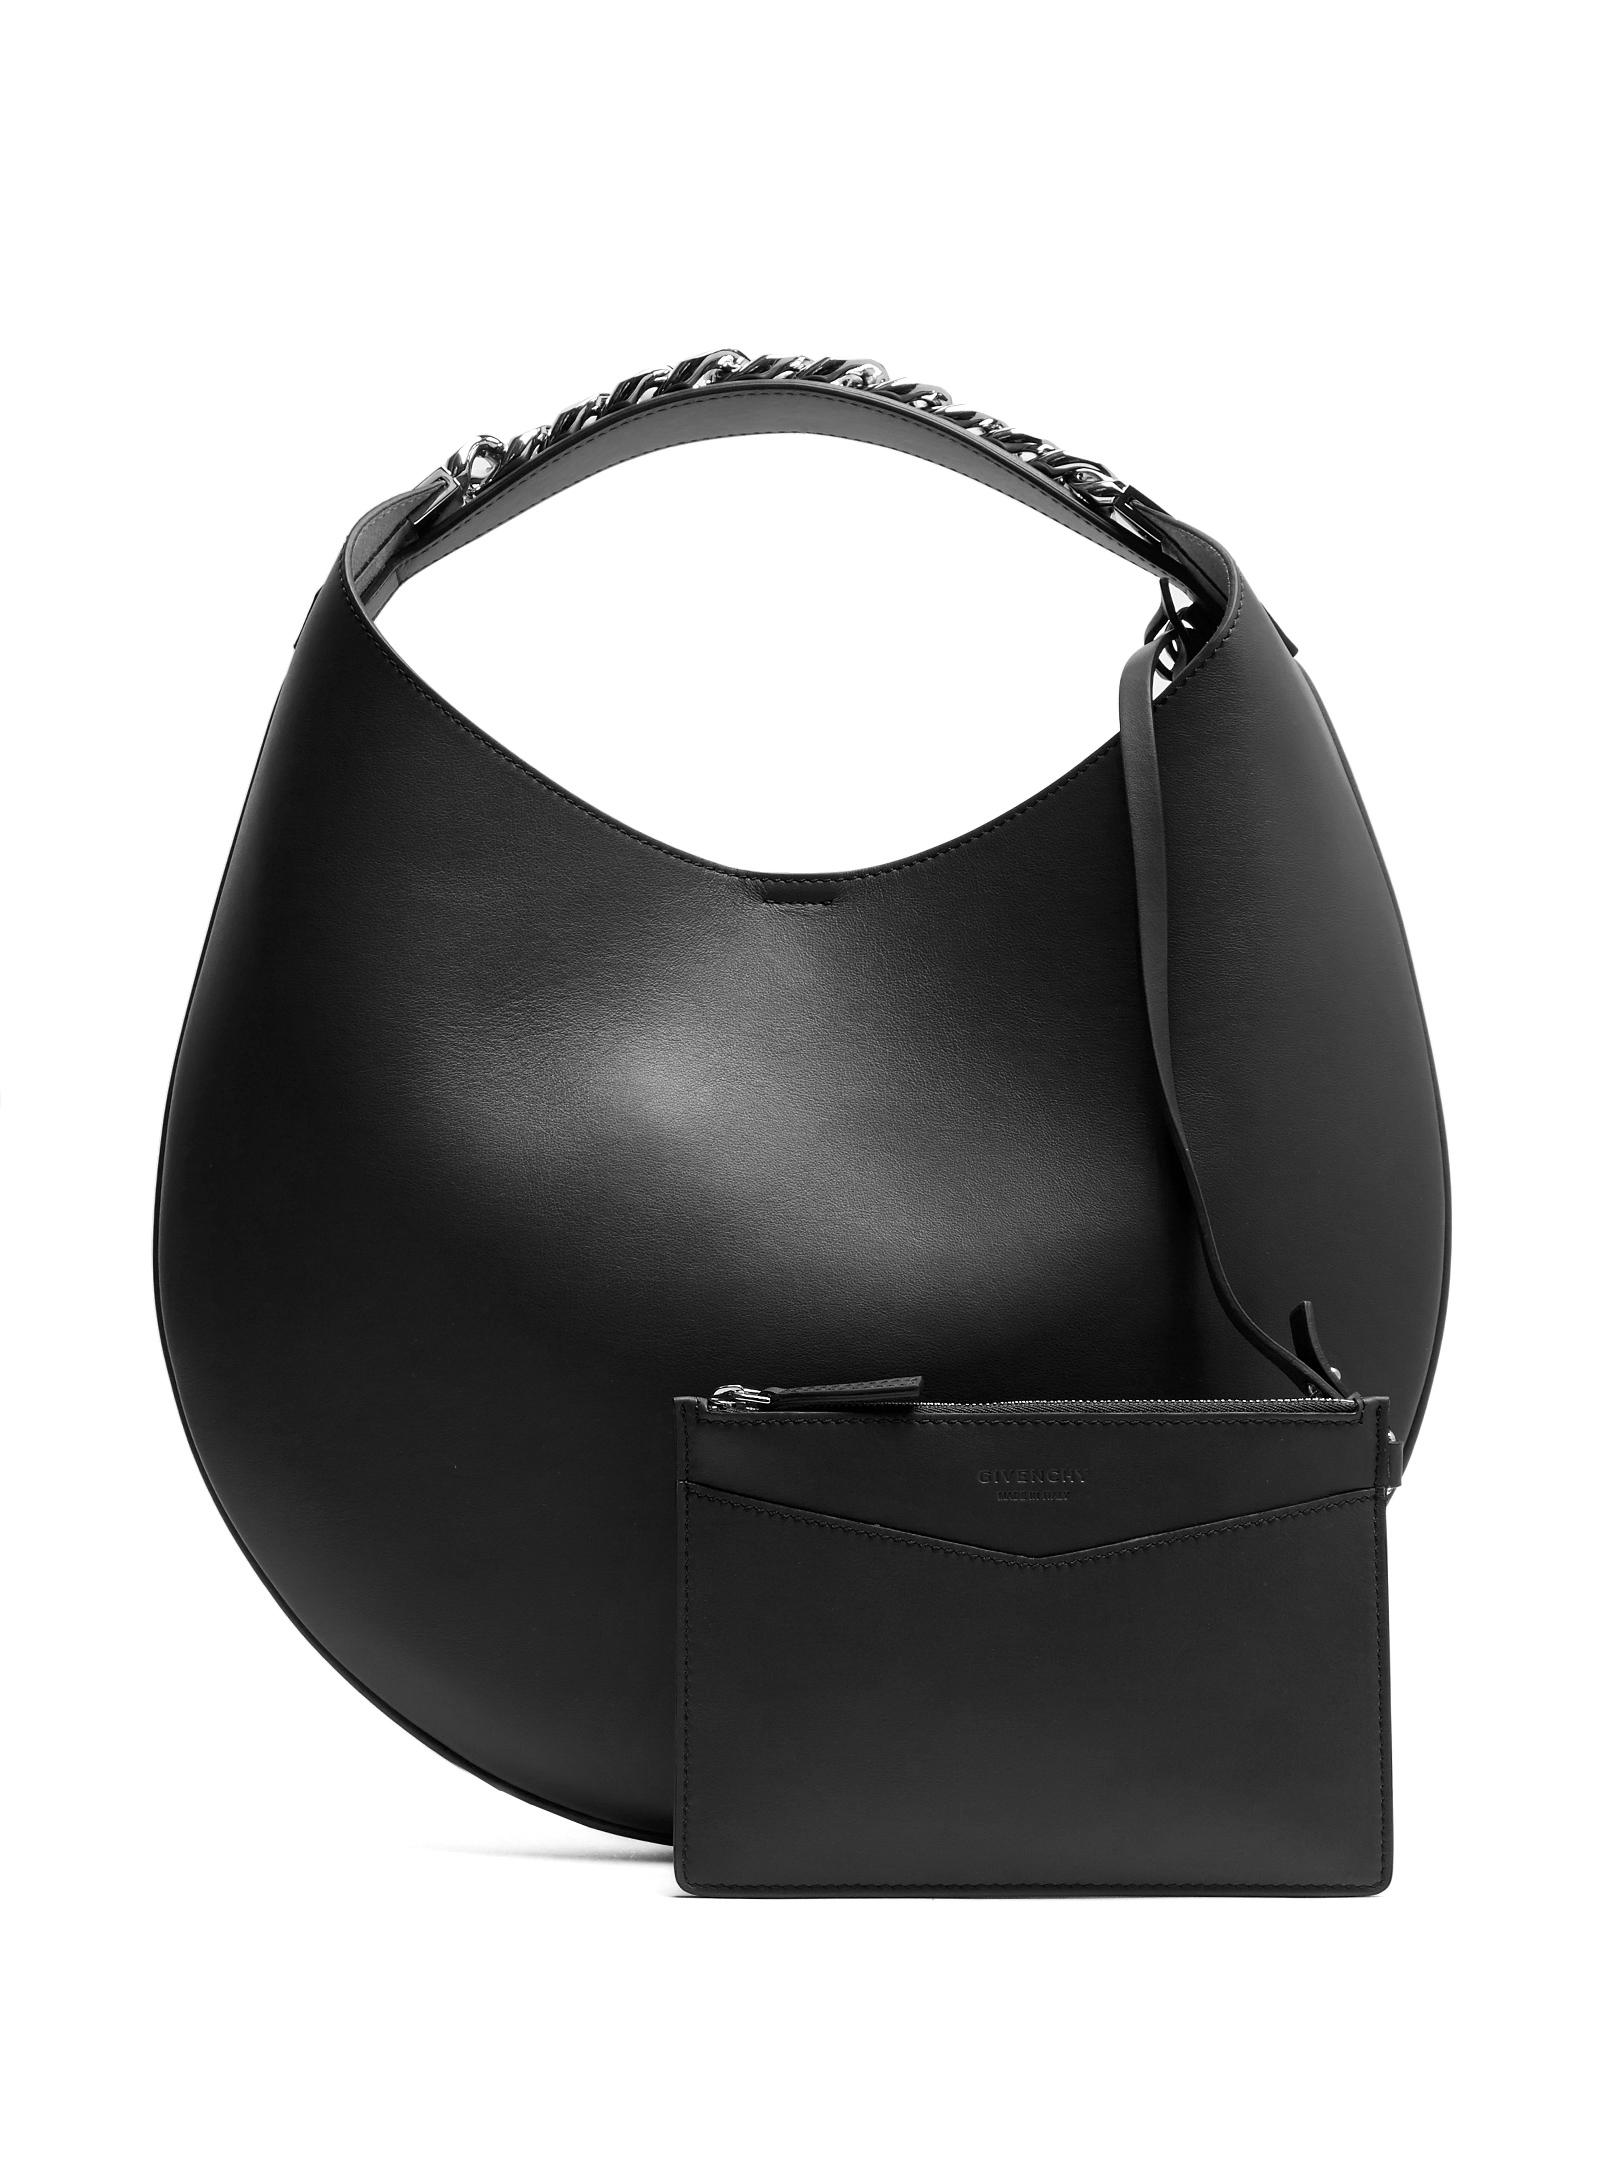 Givenchy Infinity Small Leather Chain Hobo Bag in Black - Lyst